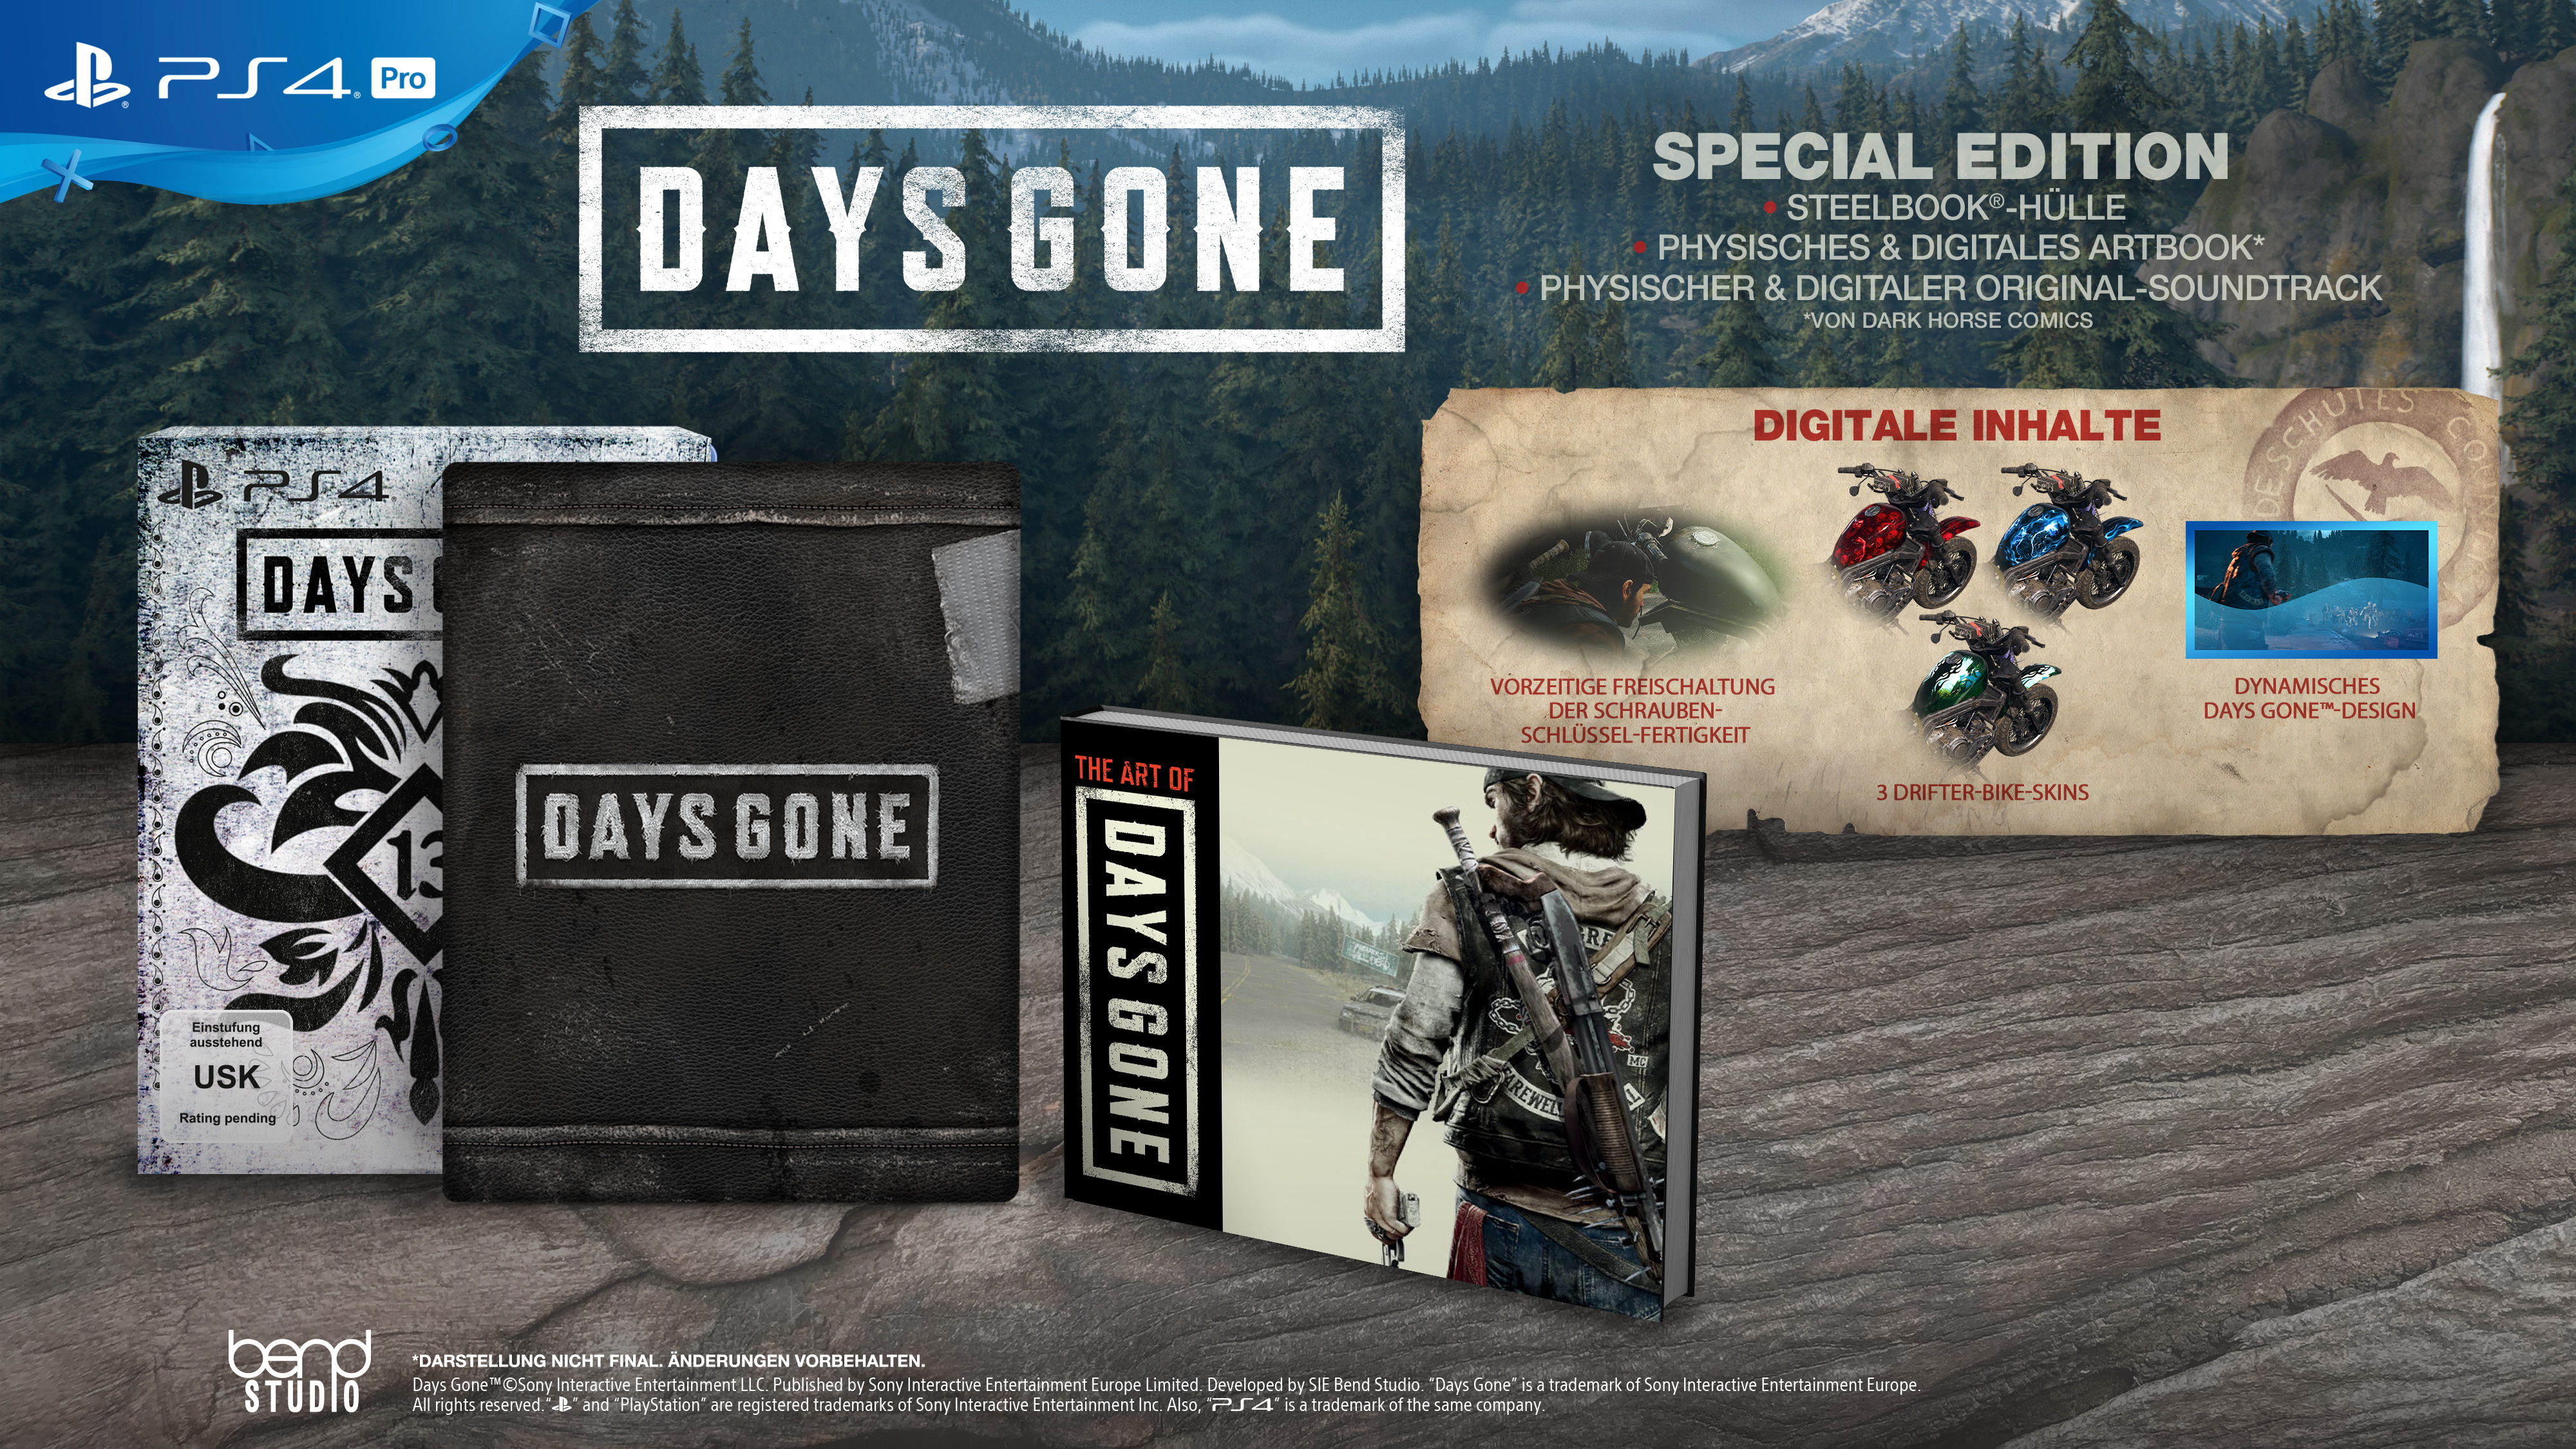 Days Gone - Special Edition 4] - [PlayStation